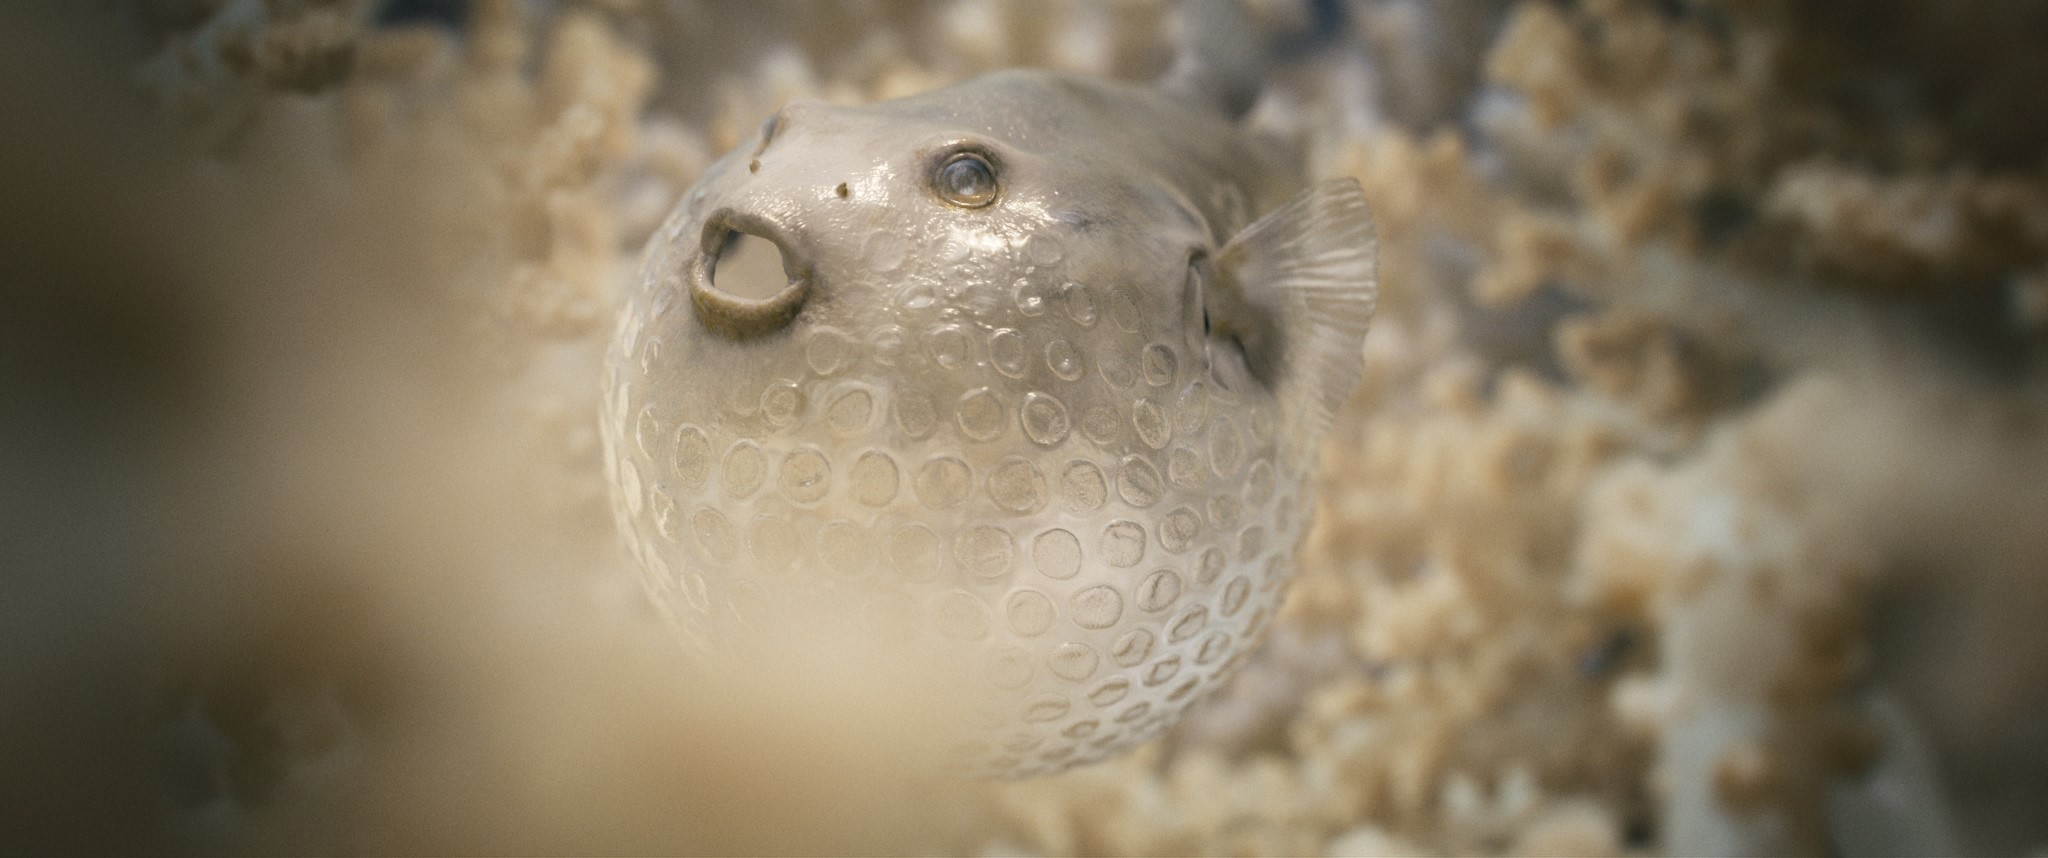 Scene from "The Beauty" with a shimmering inflated puffer fish